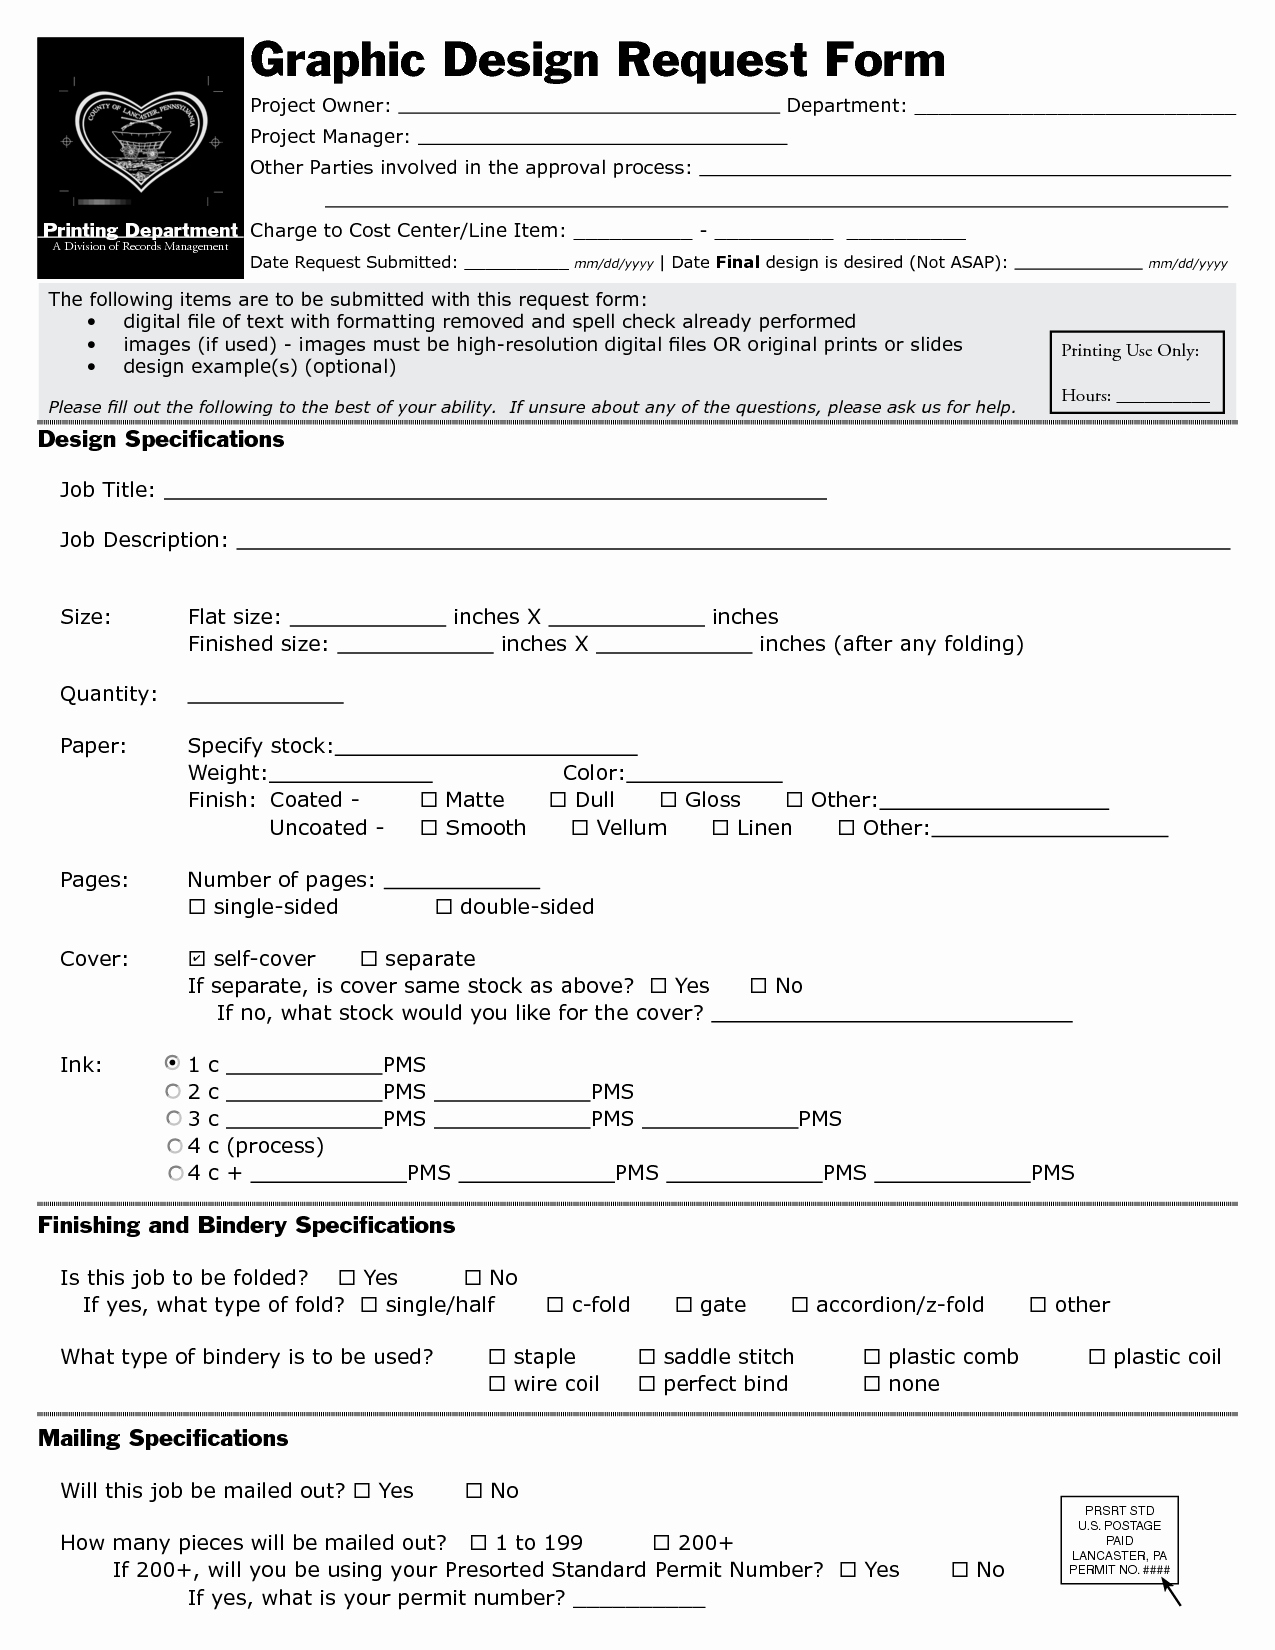 Design Request form Template Awesome Graphic Design Request form Template